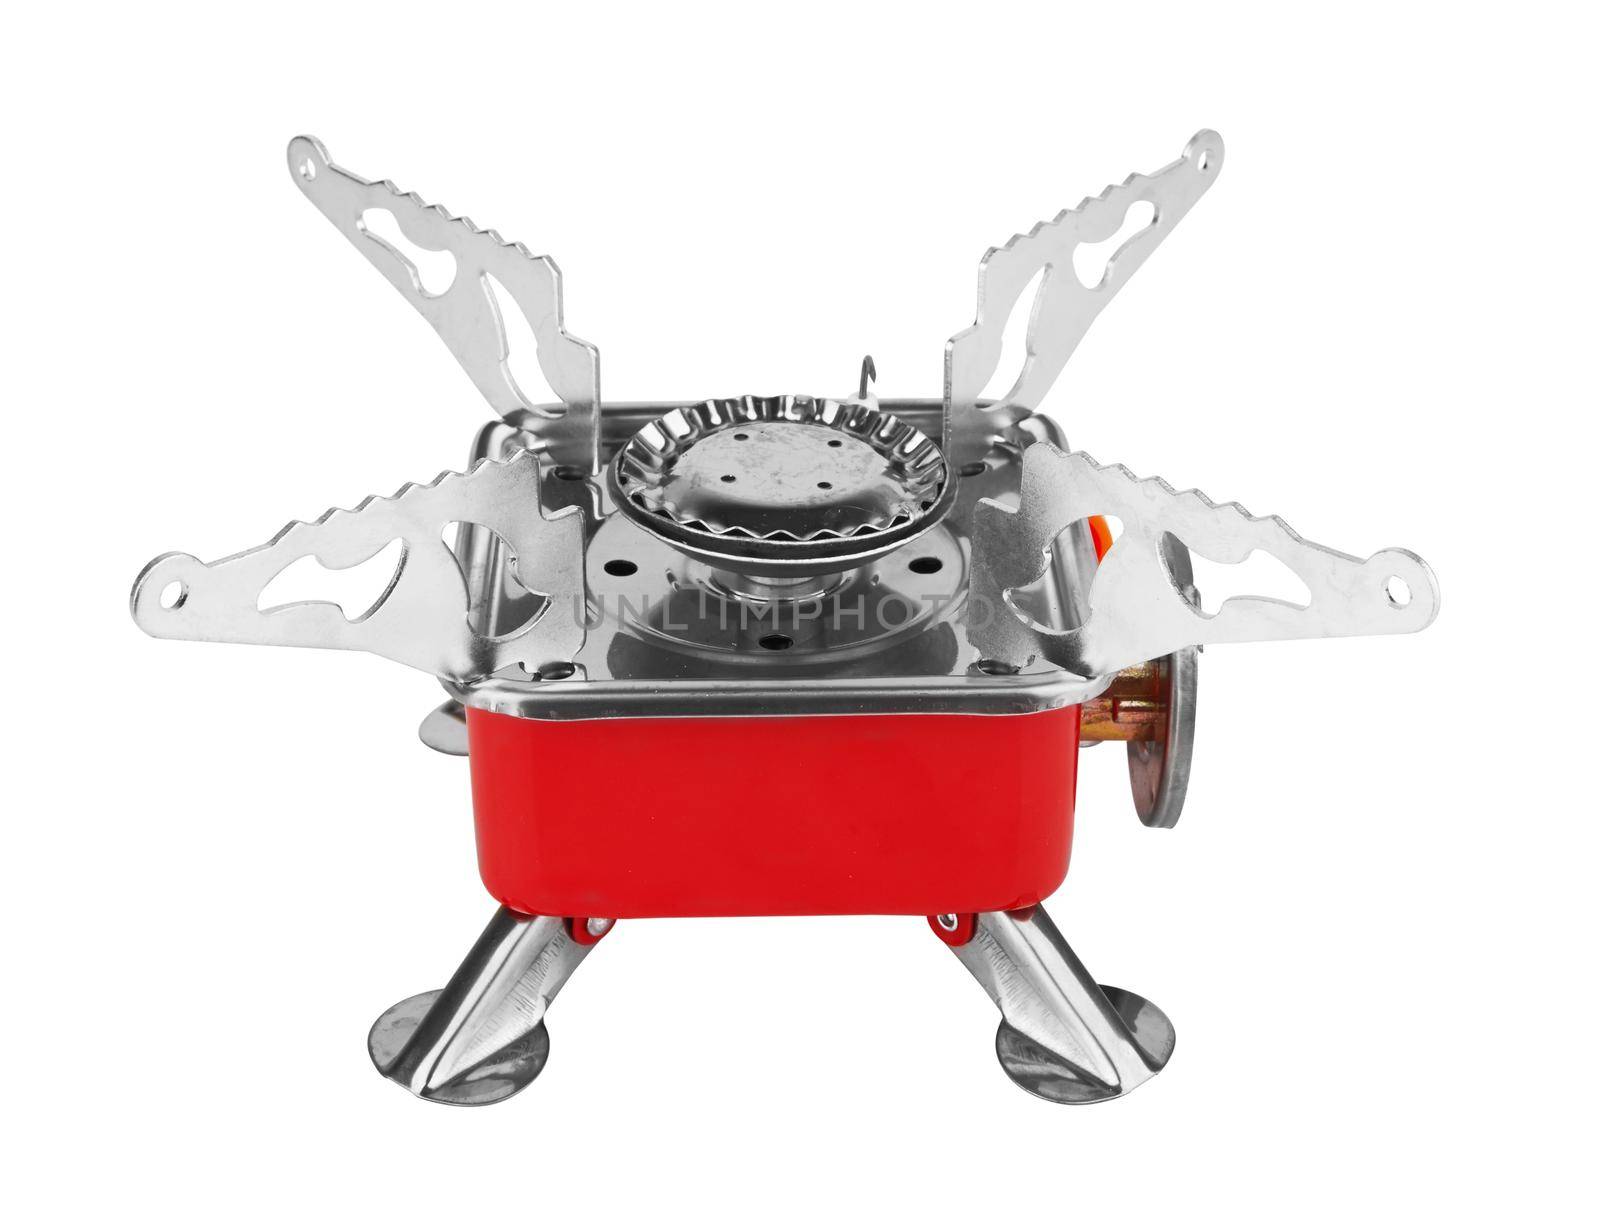 Camping gas stove by pioneer111